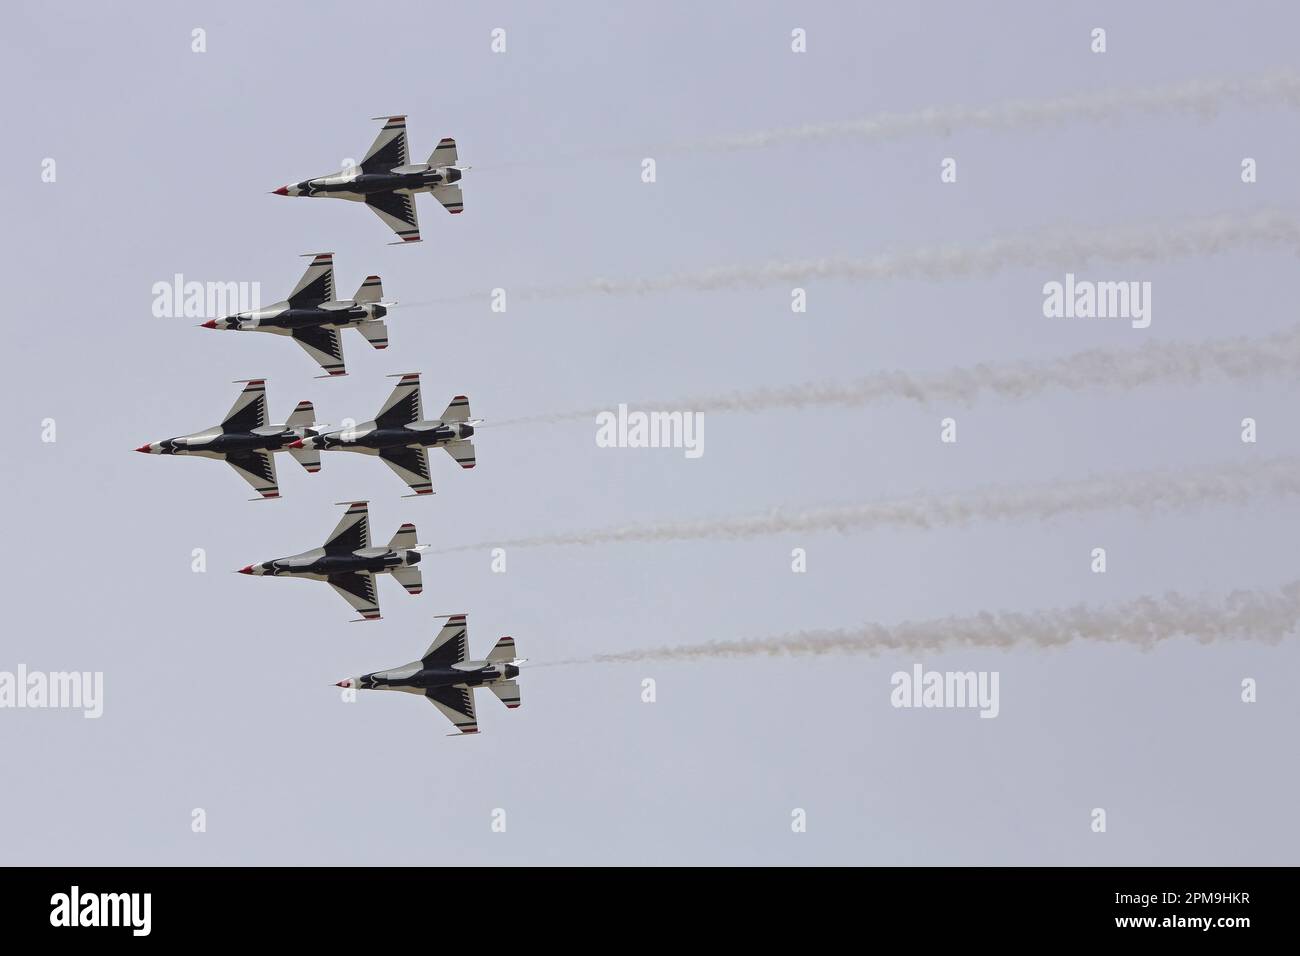 Point Mugu, California / USA - March 13, 2023: All six F-16 fighter jets of the United States Air Force USAF Thunderbirds squadron fly by in formation. Stock Photo